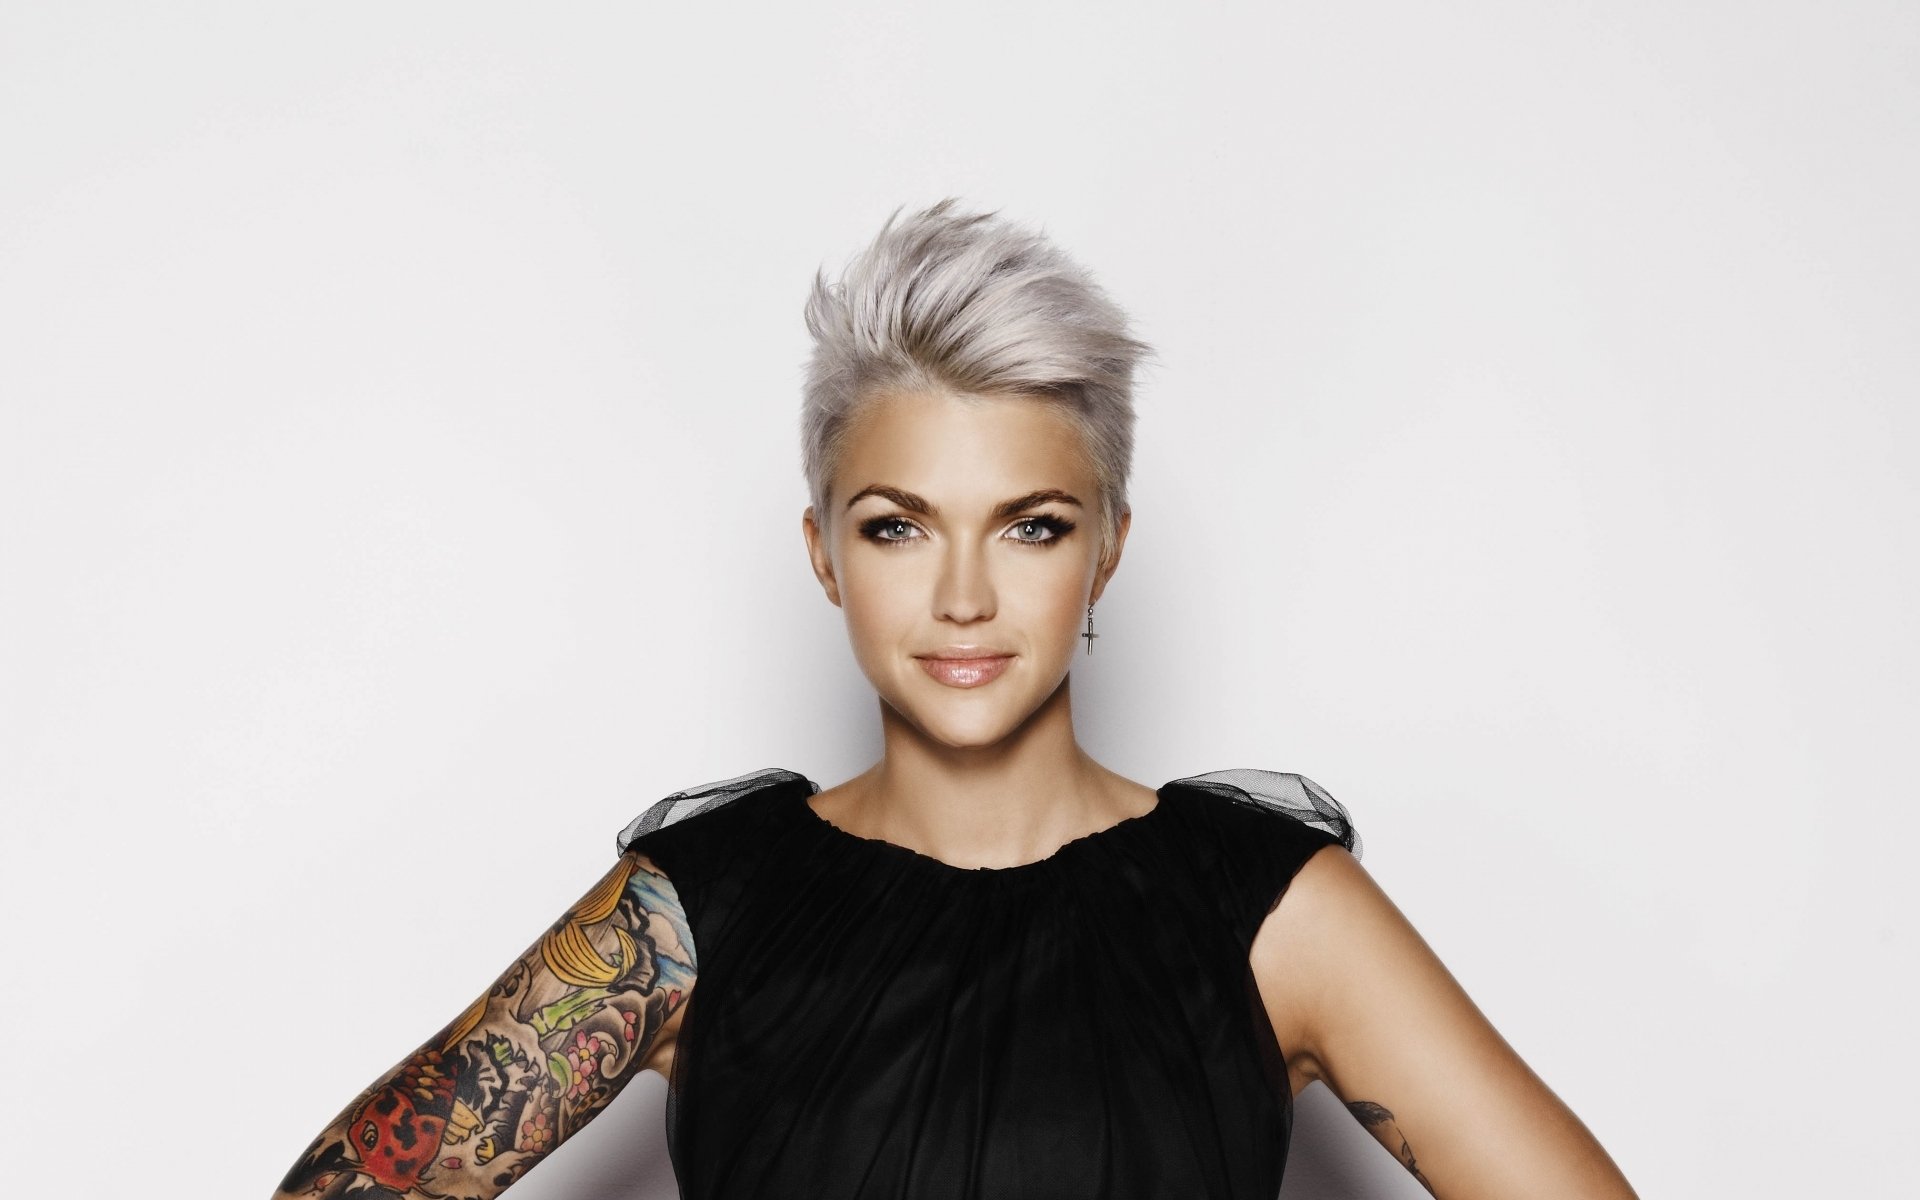 Ruby Rose Hd Wallpaper Background Image 1920x1200 6263